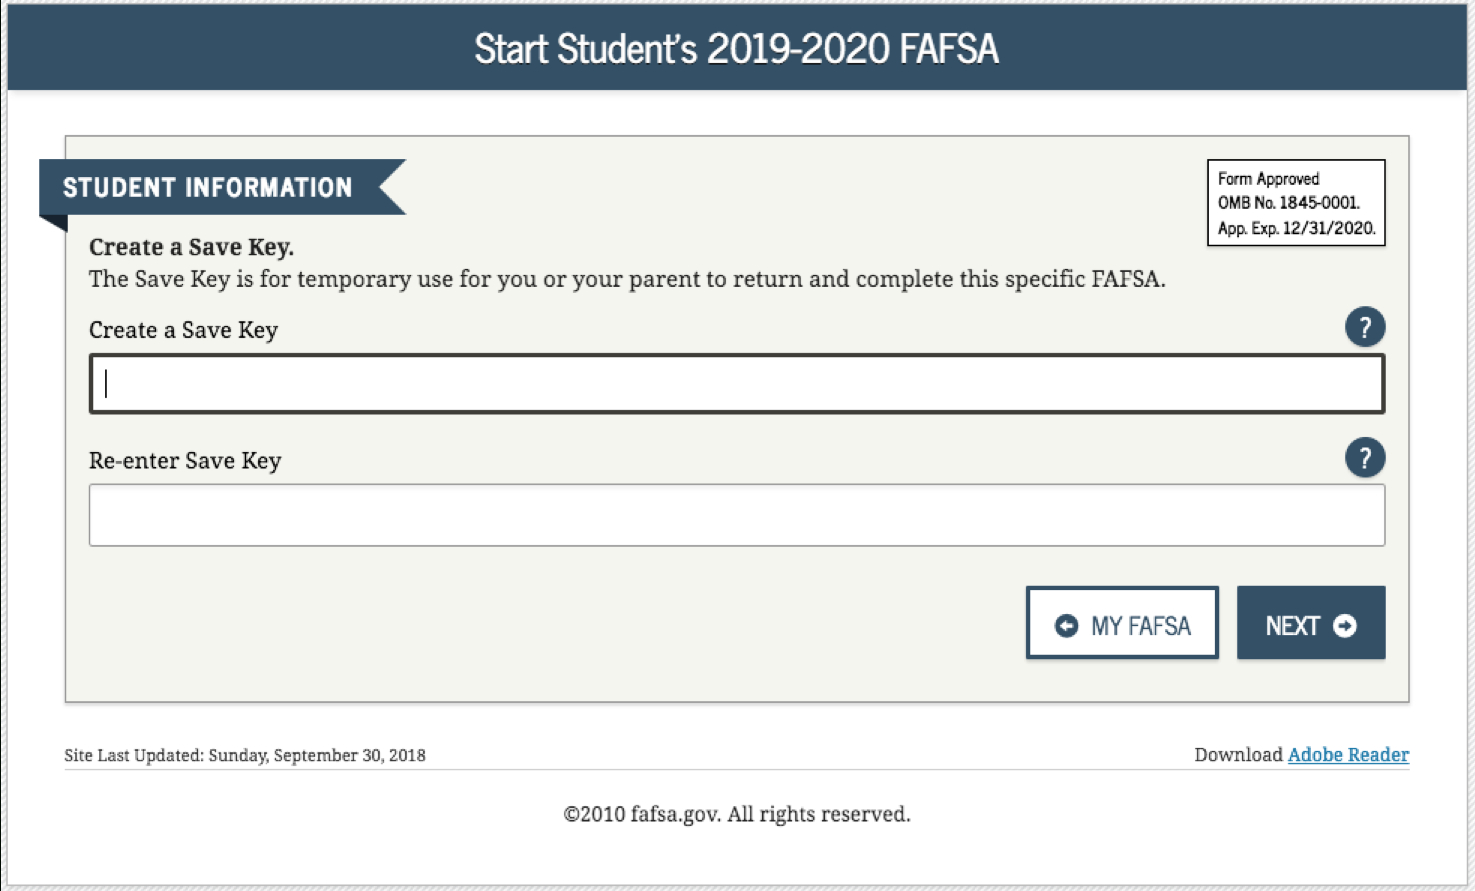 How To Complete The 2019-2020 Fafsa Application - Free Printable Fafsa Form